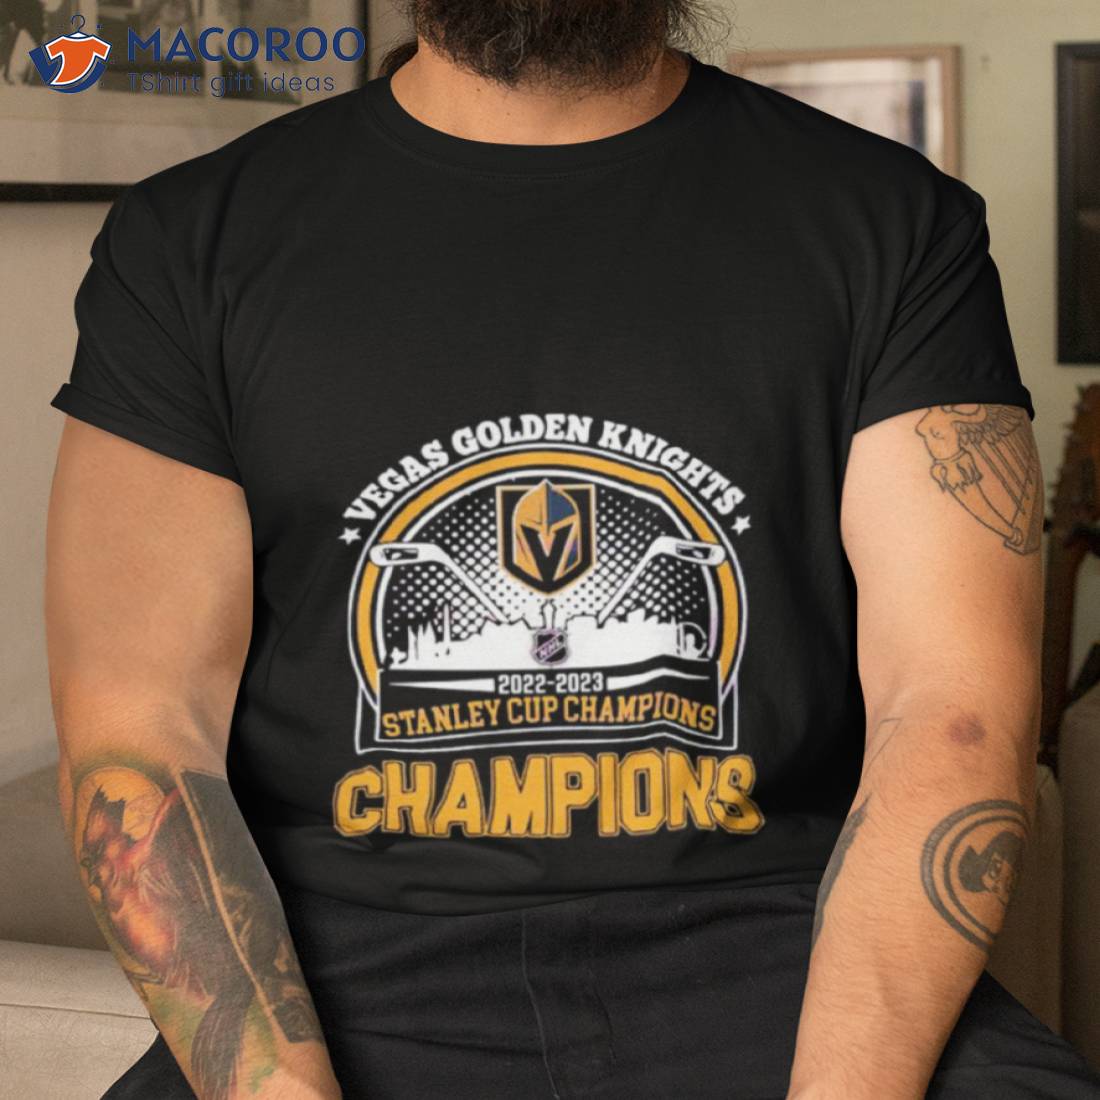 https://images.macoroo.com/wp-content/uploads/2023/06/2023-stanley-cup-champions-are-vegas-golden-knights-shirt-tshirt.jpg